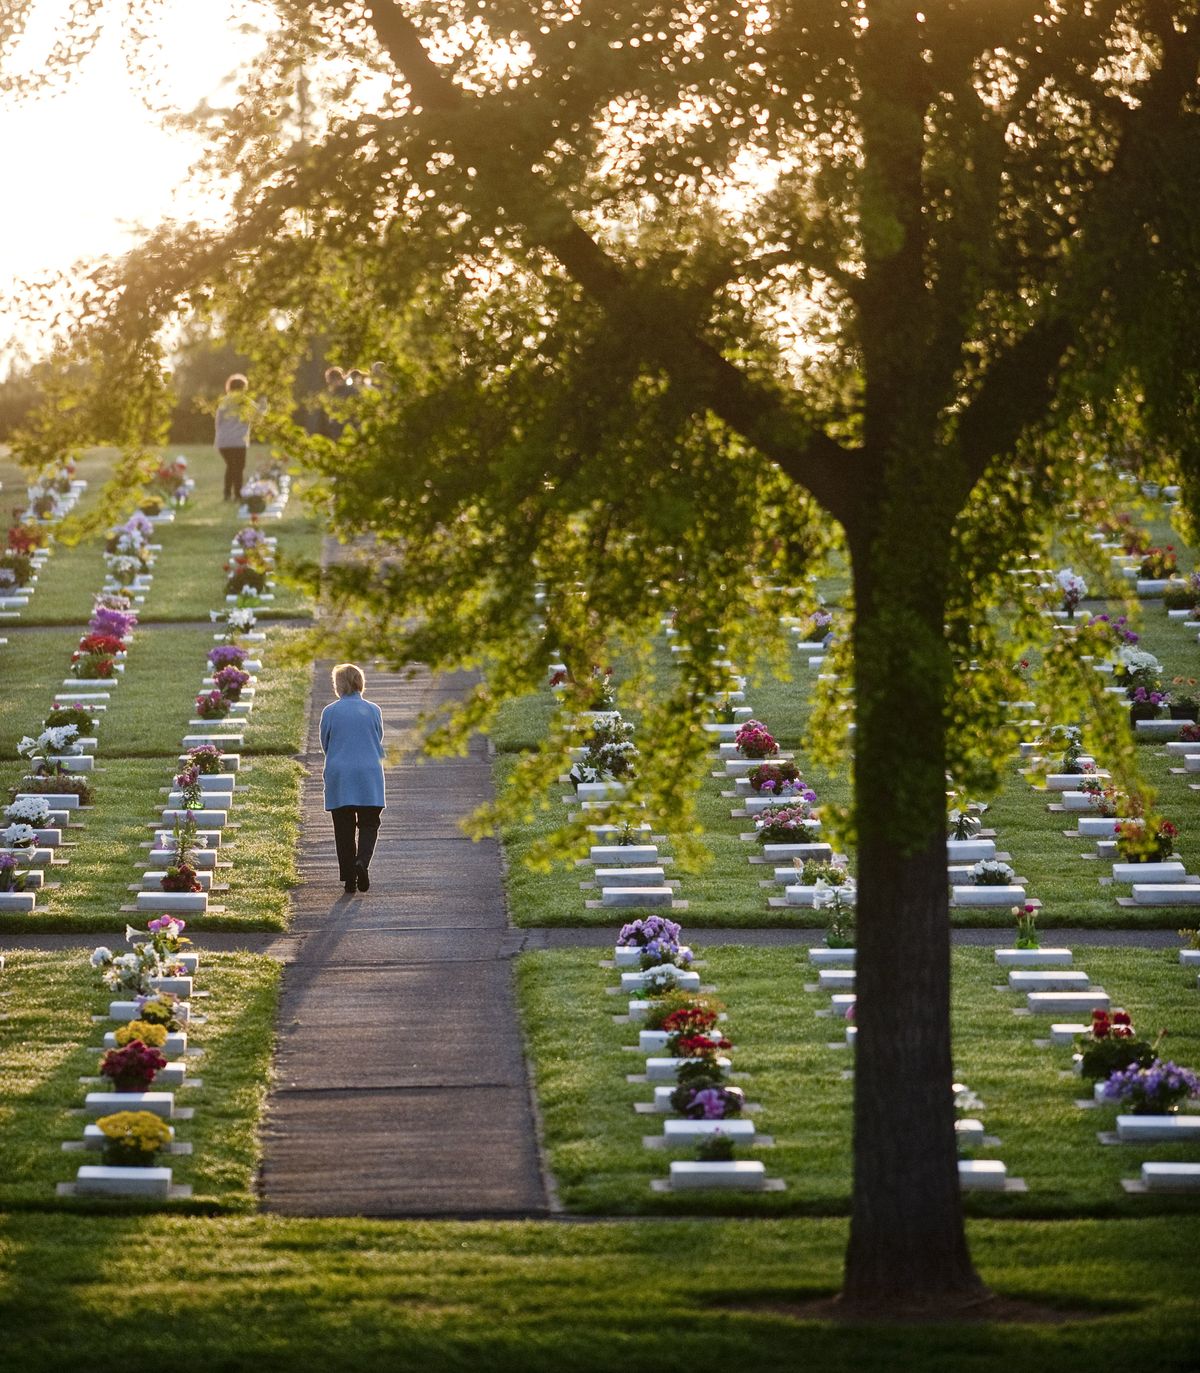 A woman walks through rows of headstones in God’s Acre cemetery in Winston- Salem, N.C., after the Easter sunrise service Sunday. As part of Easter week traditions, Moravian church members clean the uniform gravestones. (Associated Press)